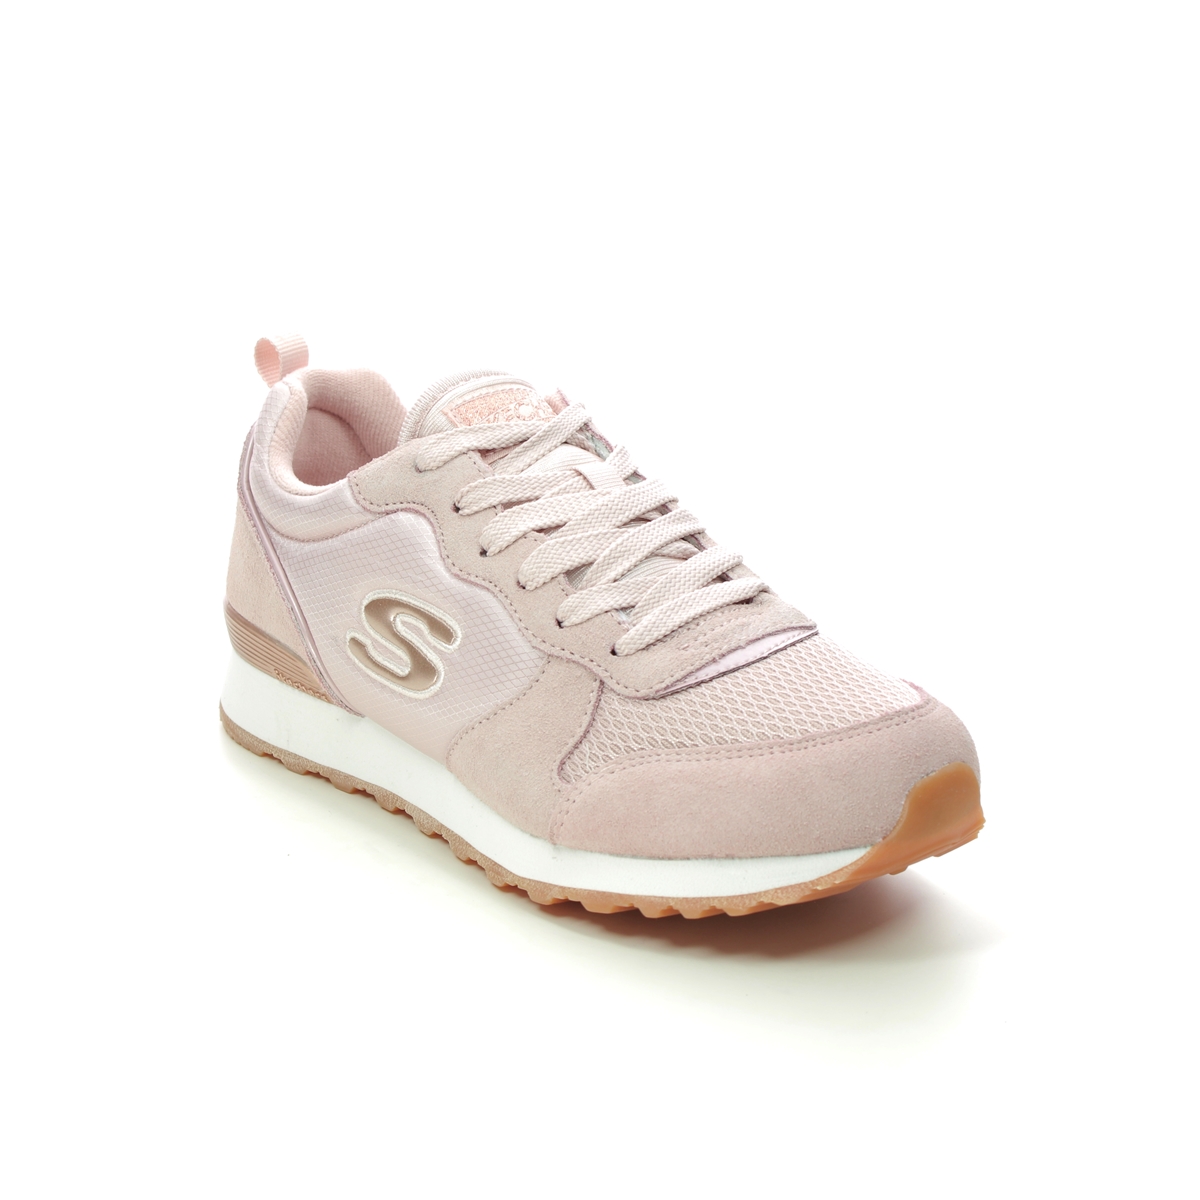 Skechers Og 85 Gold Gurl Blush Pink Womens Trainers 111 In Size 5 In Plain Blush Pink